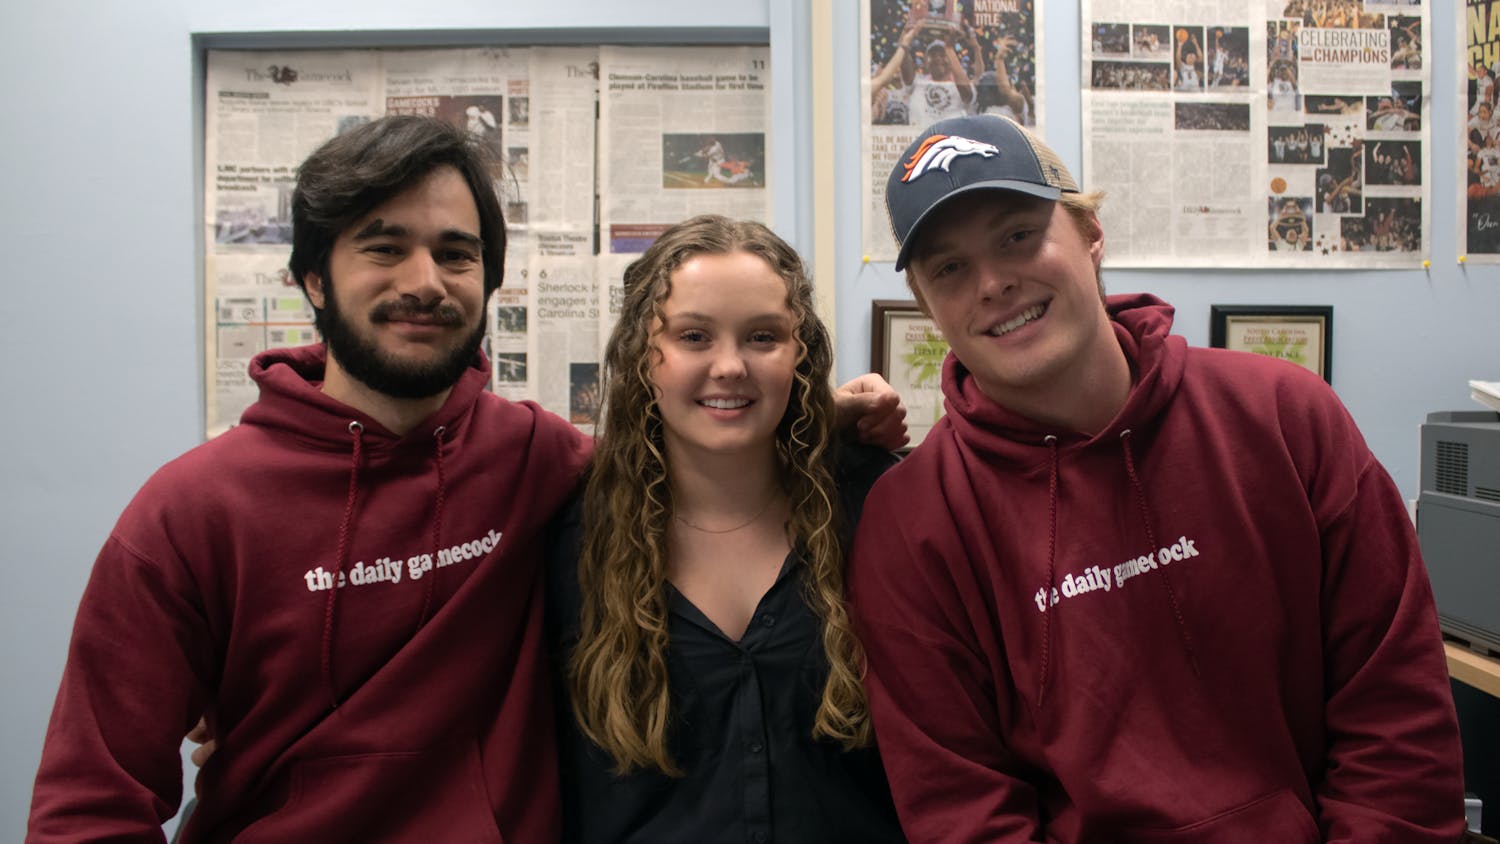 The Daily Gamecock's managing staff poses for a photo in the newsroom on Nov. 20, 2022. Editor-in-Chief Kailey Cota and managing editors Tyler Fedor (left) and Michael Sauls (right) have each worked with The Daily Gamecock for seven semesters and will step down on Dec. 12, 2022.